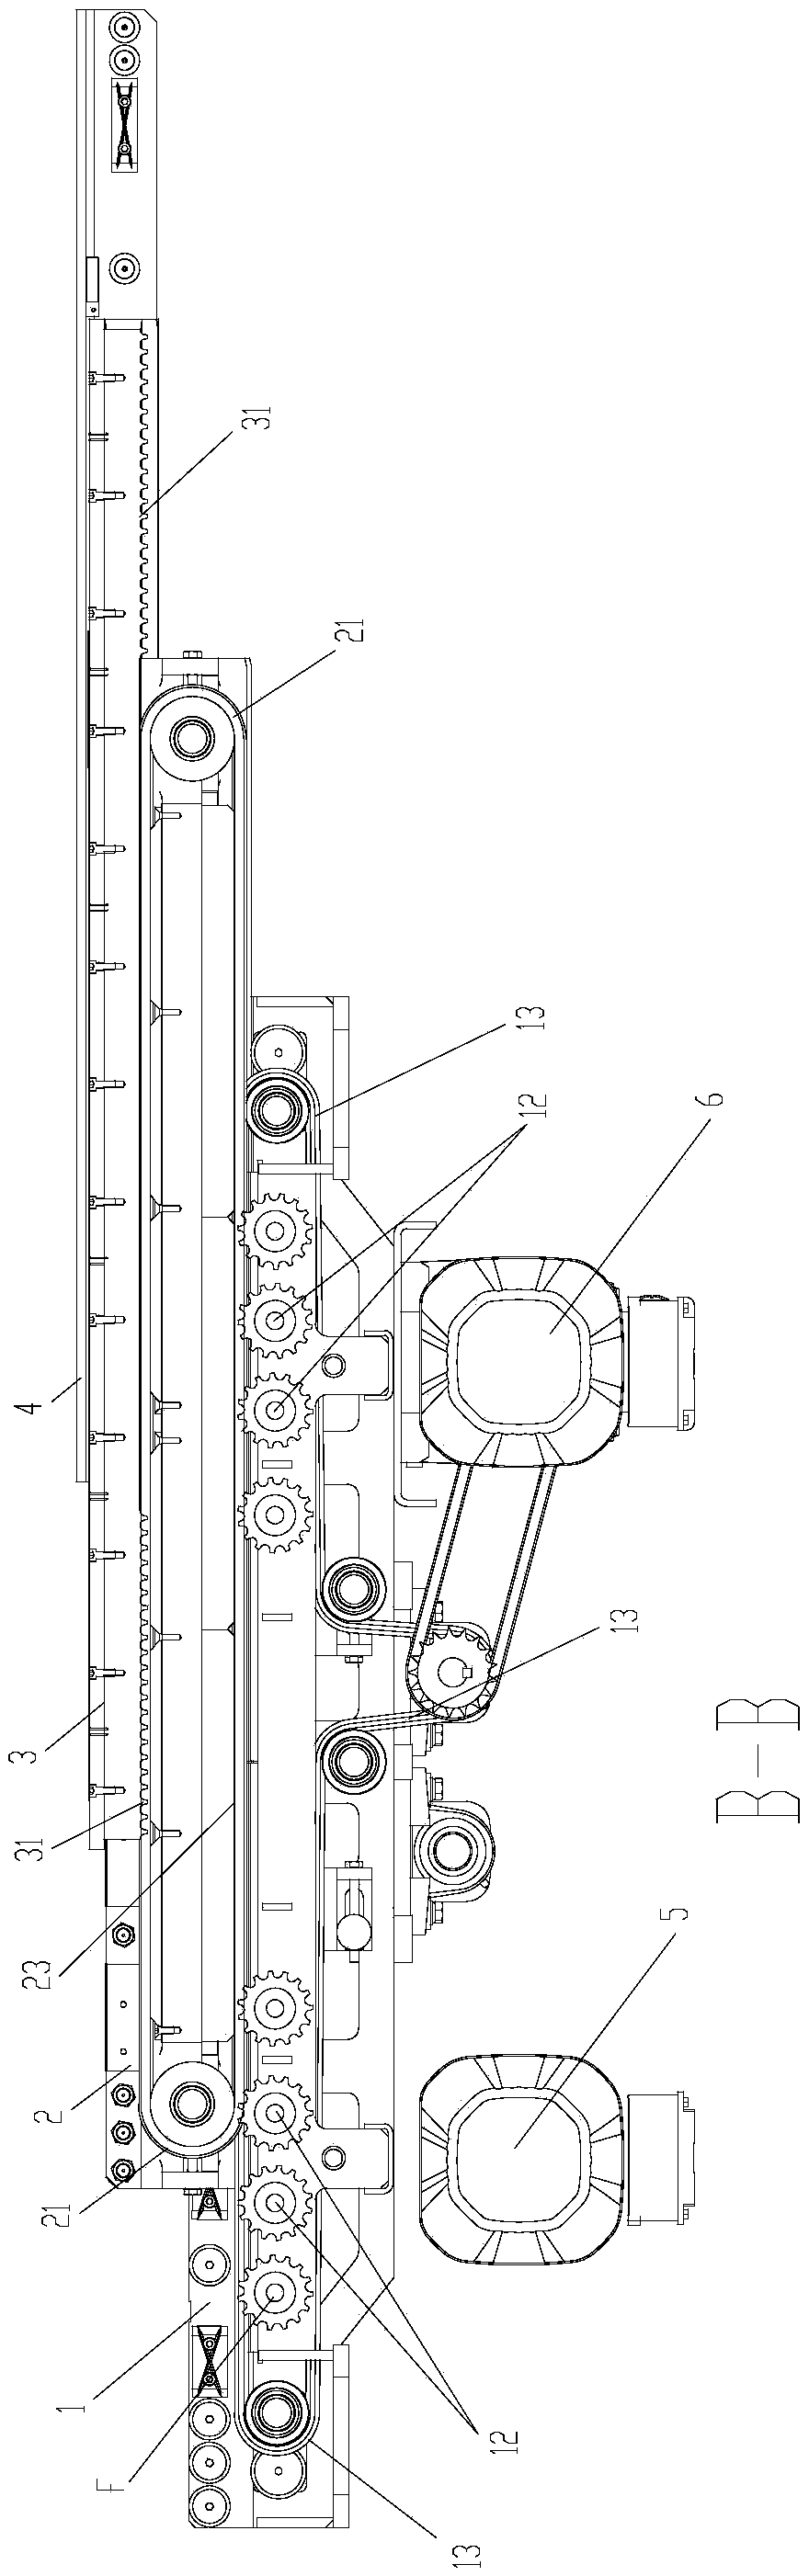 Retractable fork device